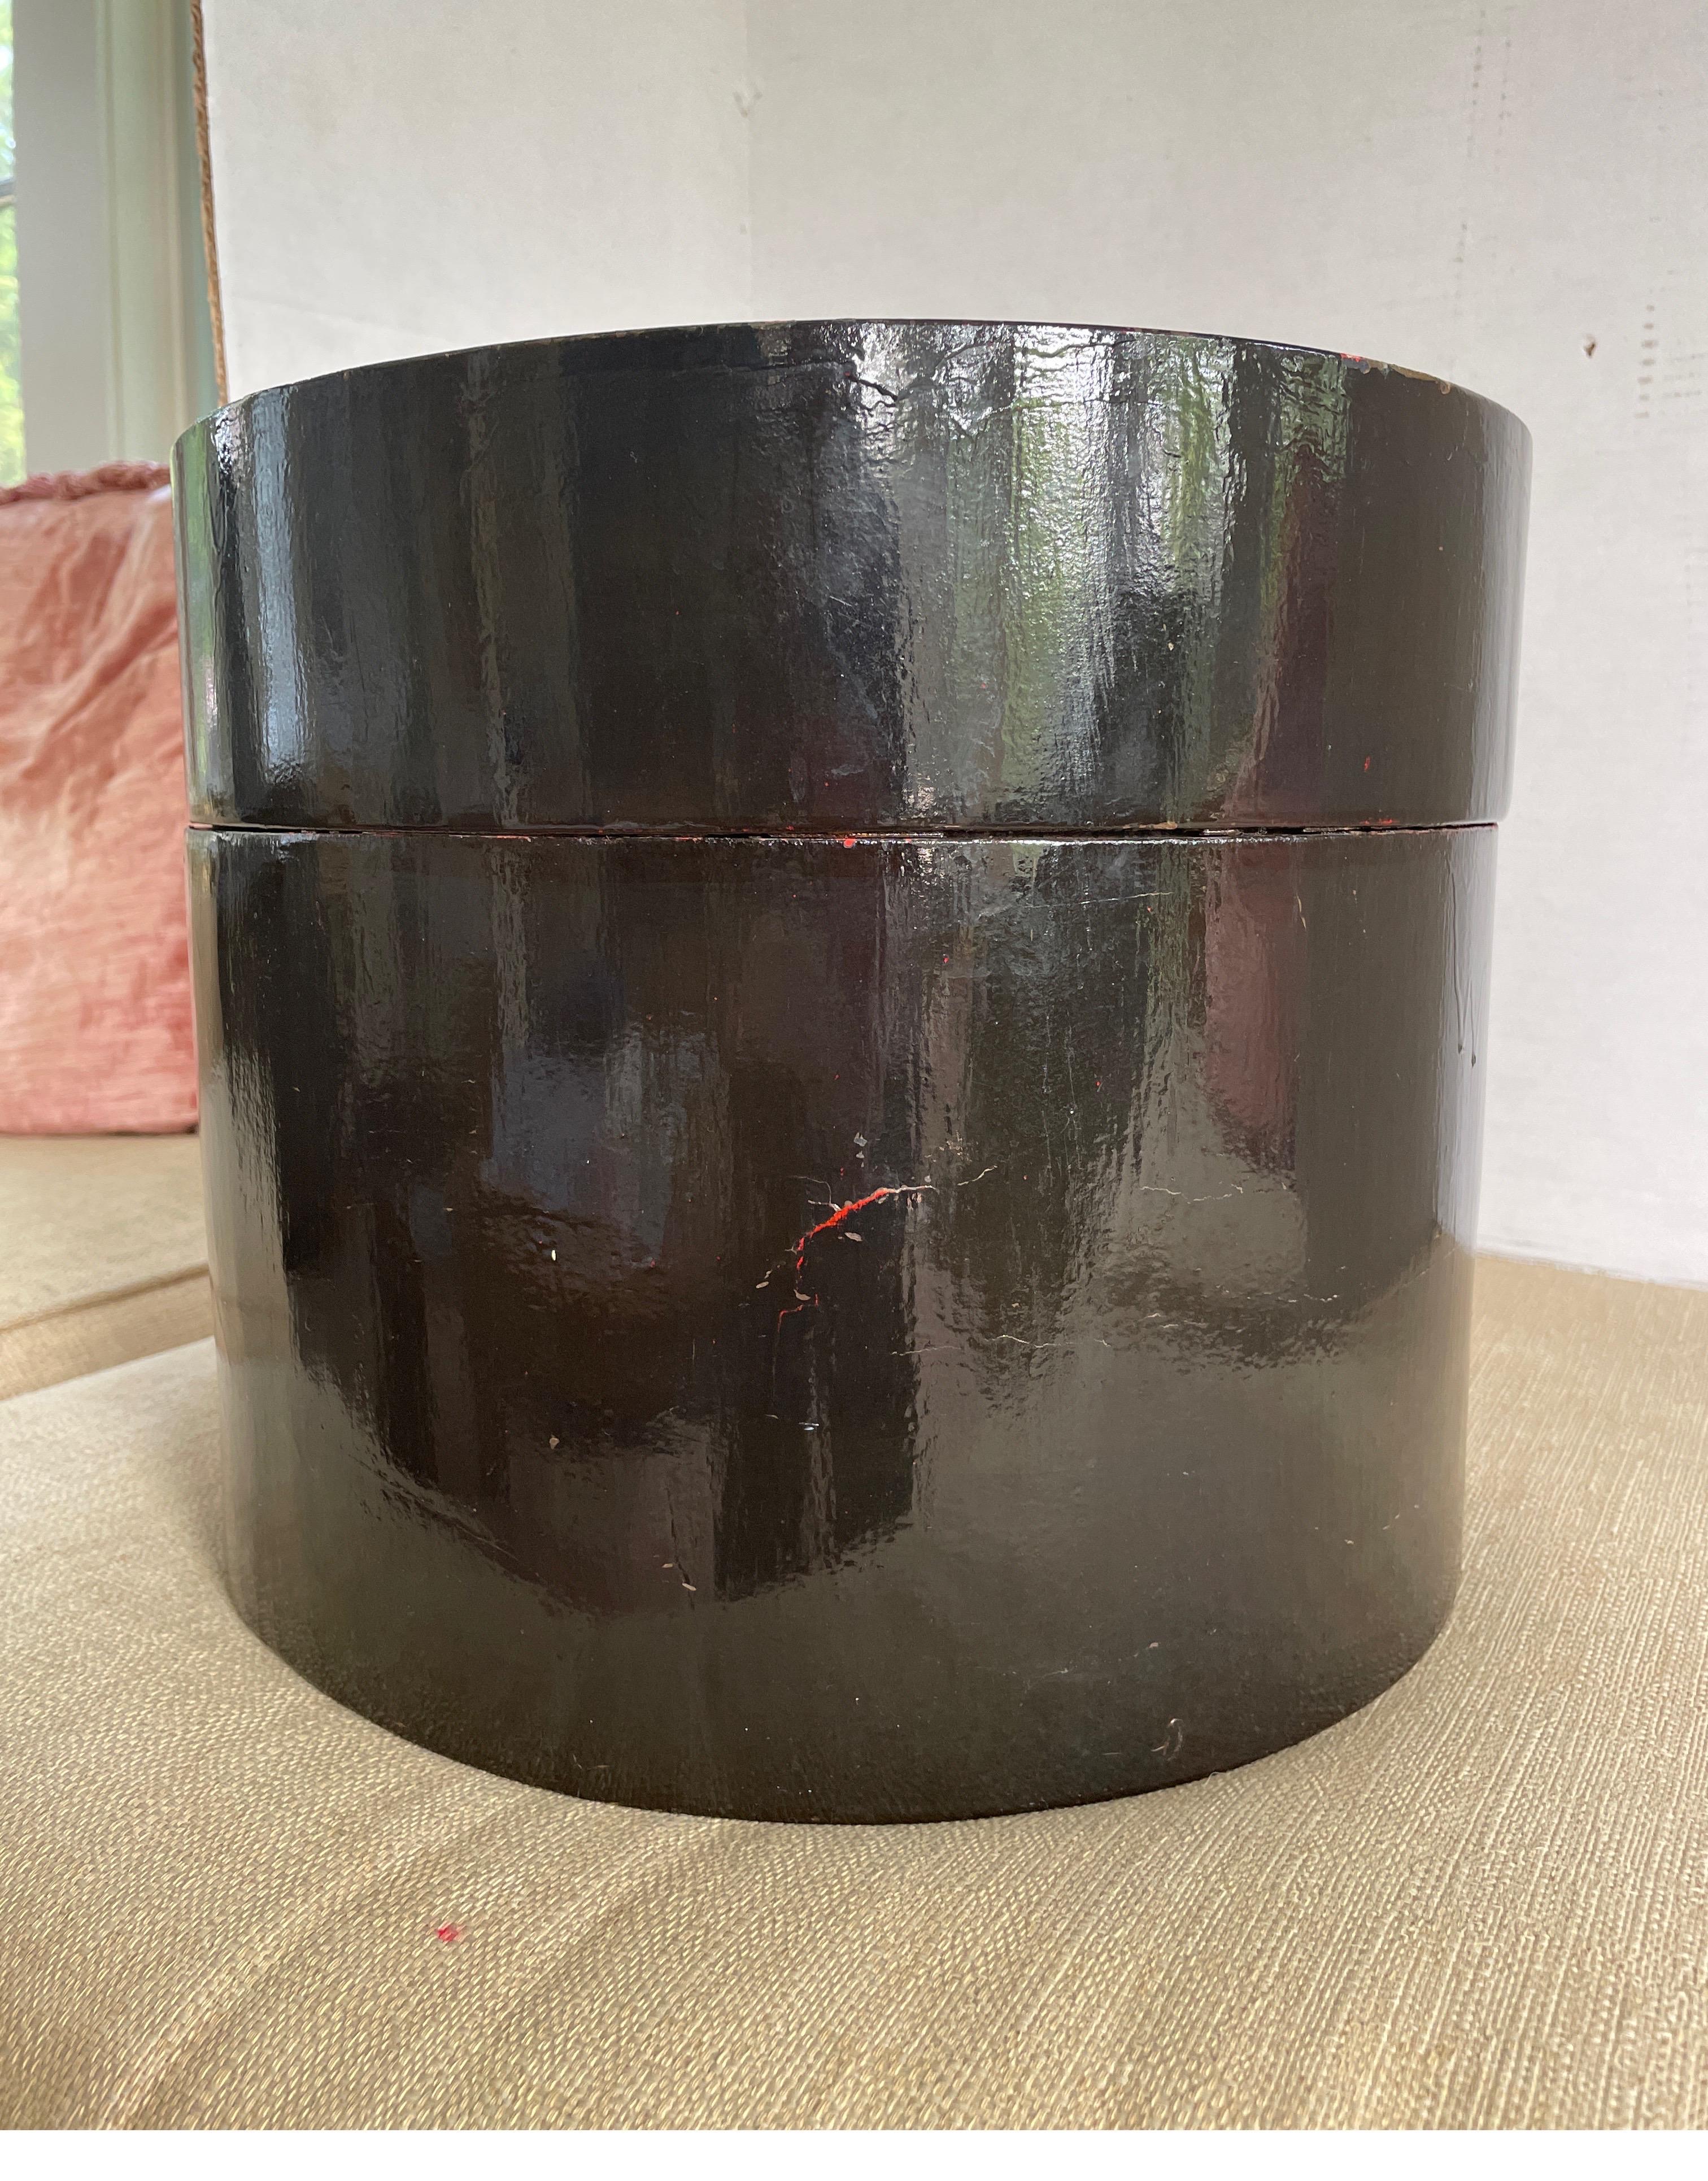 Antique Black Lacquer Round Container with Painted Floral Motifs For Sale 3